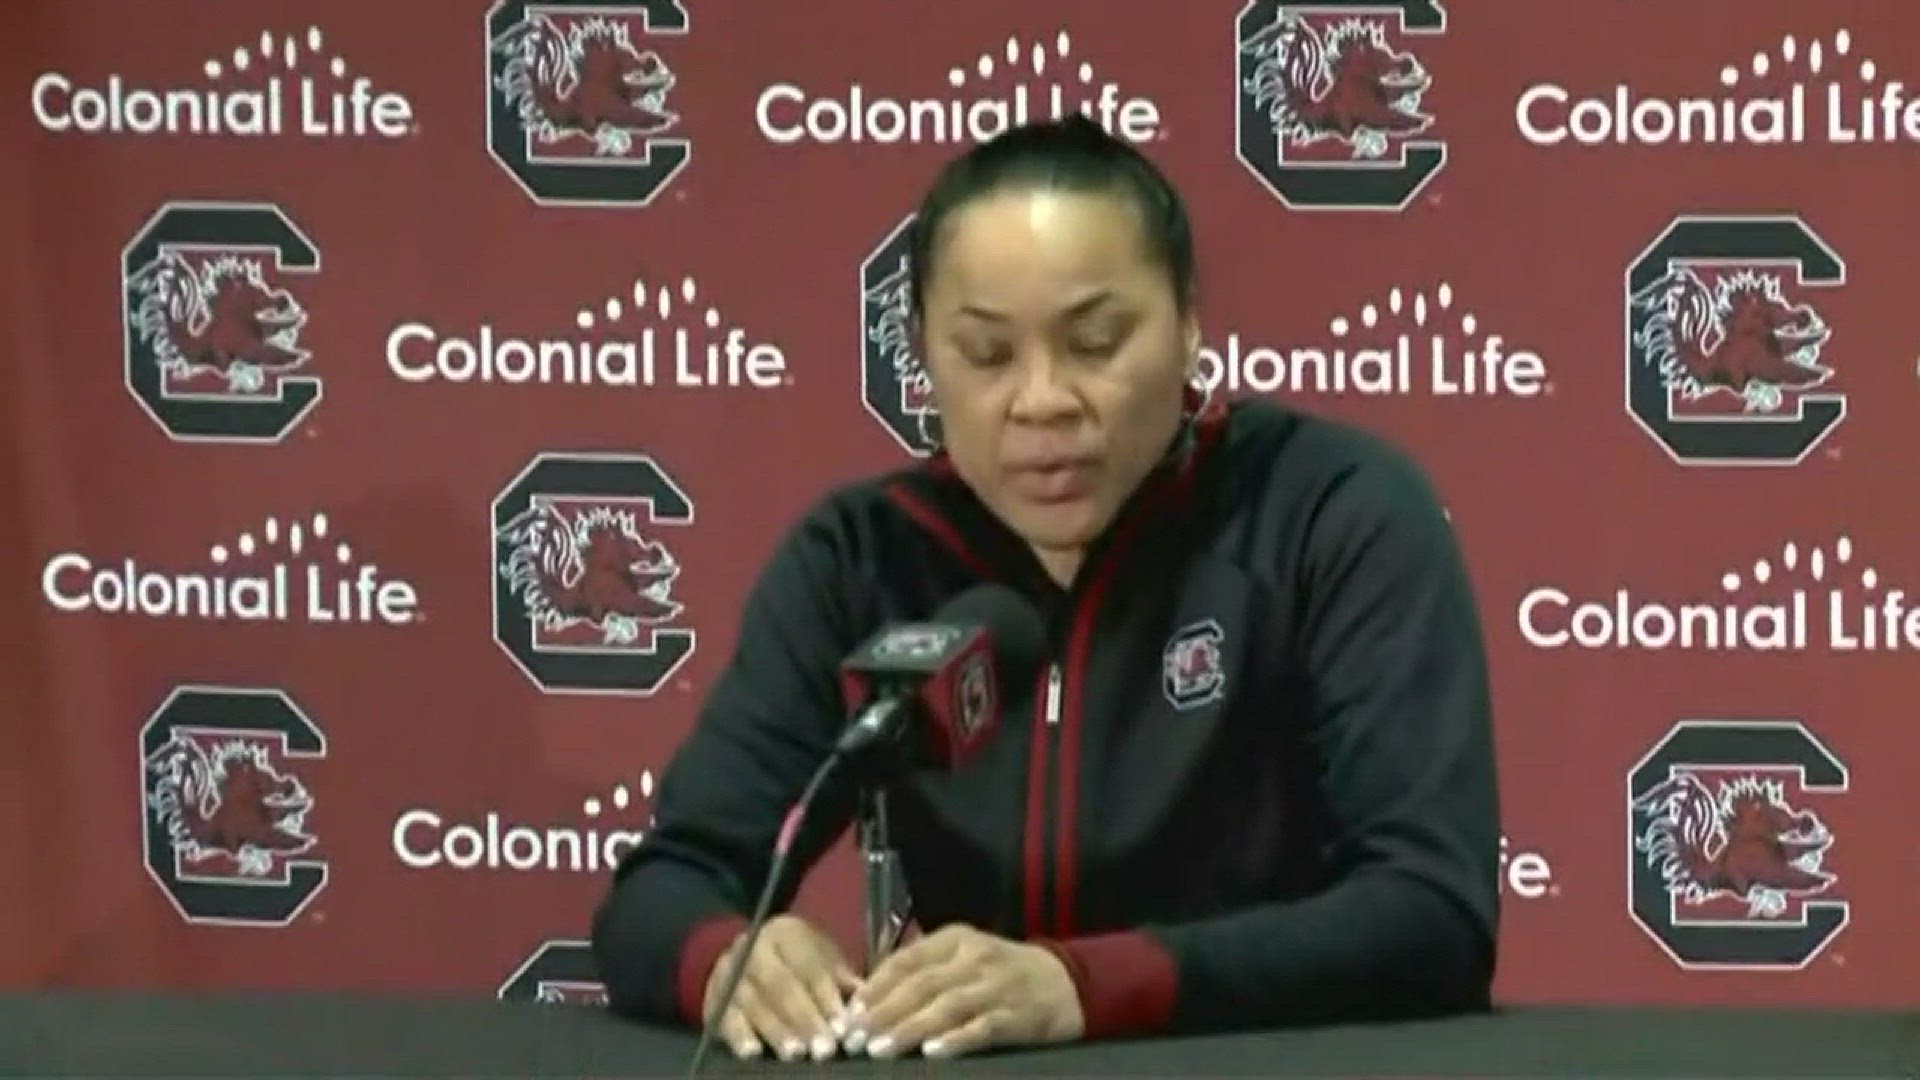 USC basketball Coach Dawn Staley made her first public statements since Missouri's athletics department head claimed she created an atmosphere that led to bad fan behavior.